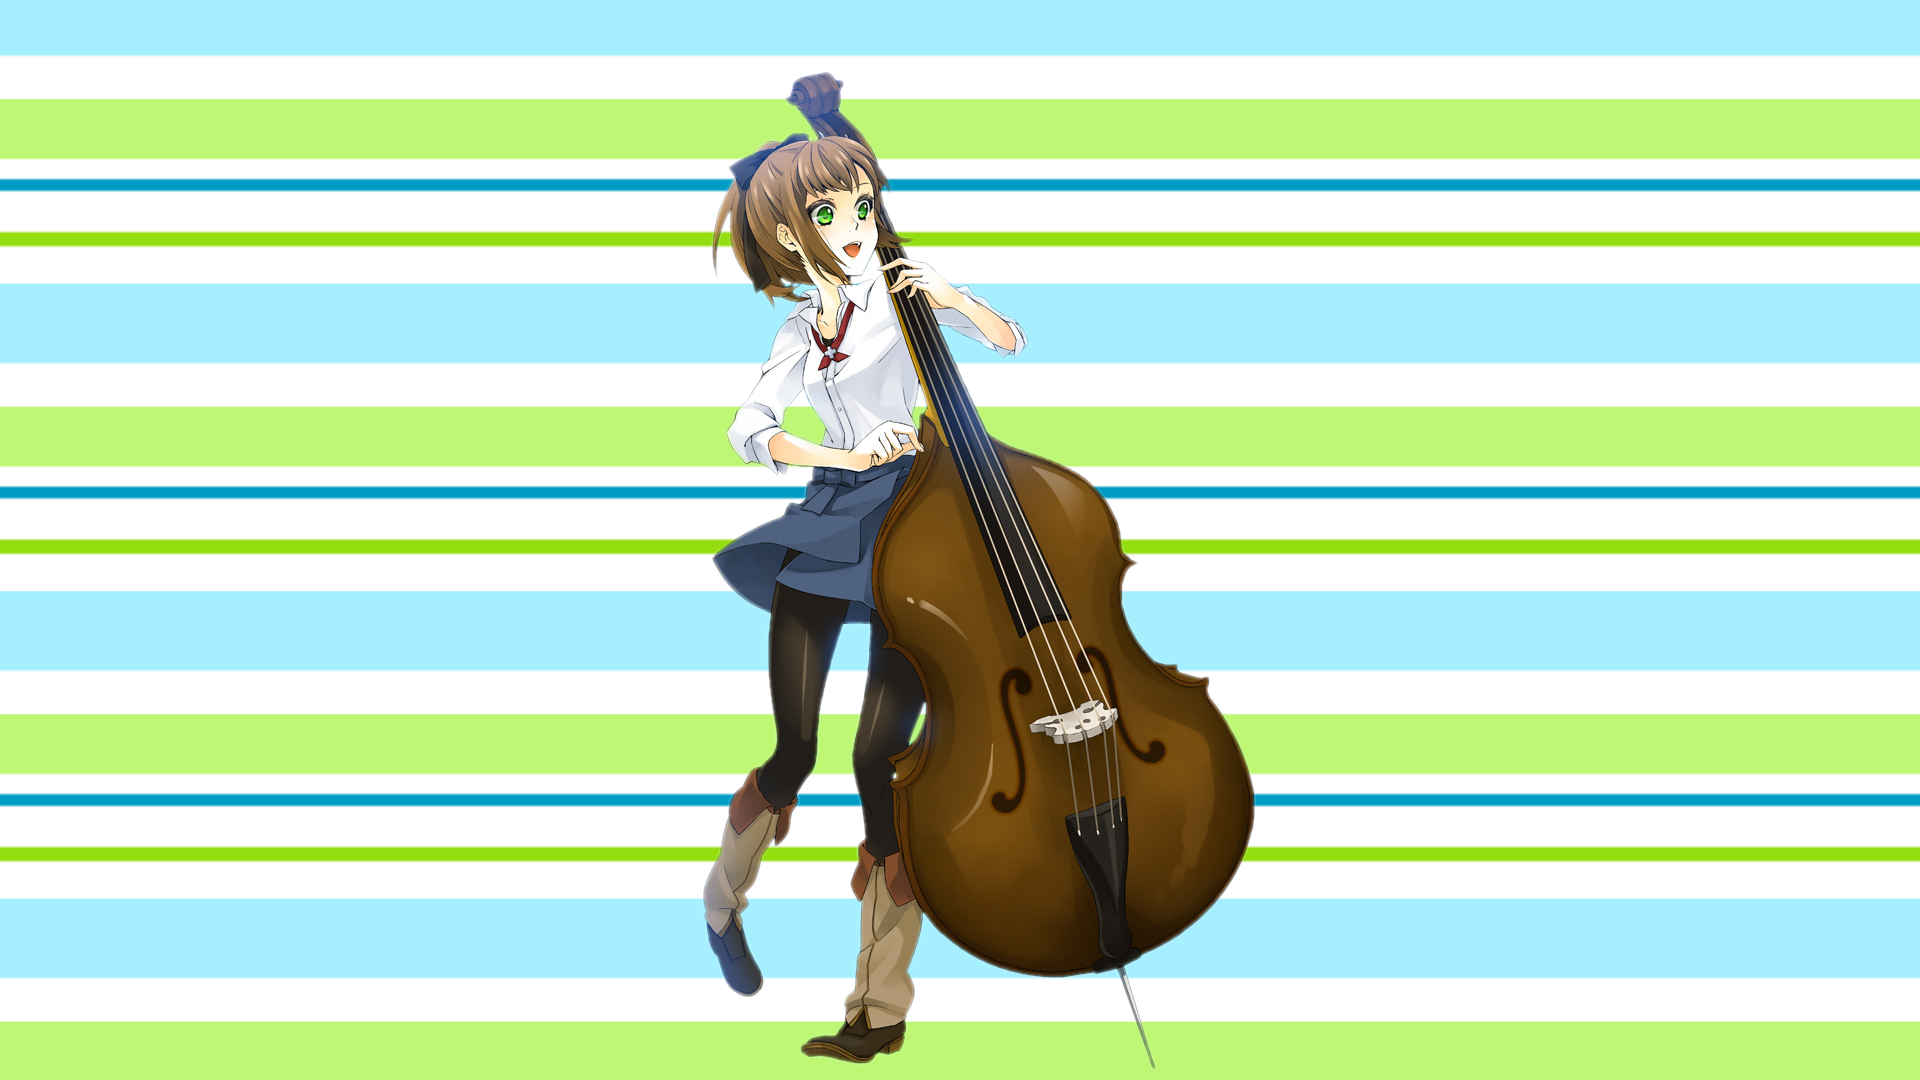 music, orchestra, anime girls, anime | 1920x1080 Wallpaper - wallhaven.cc